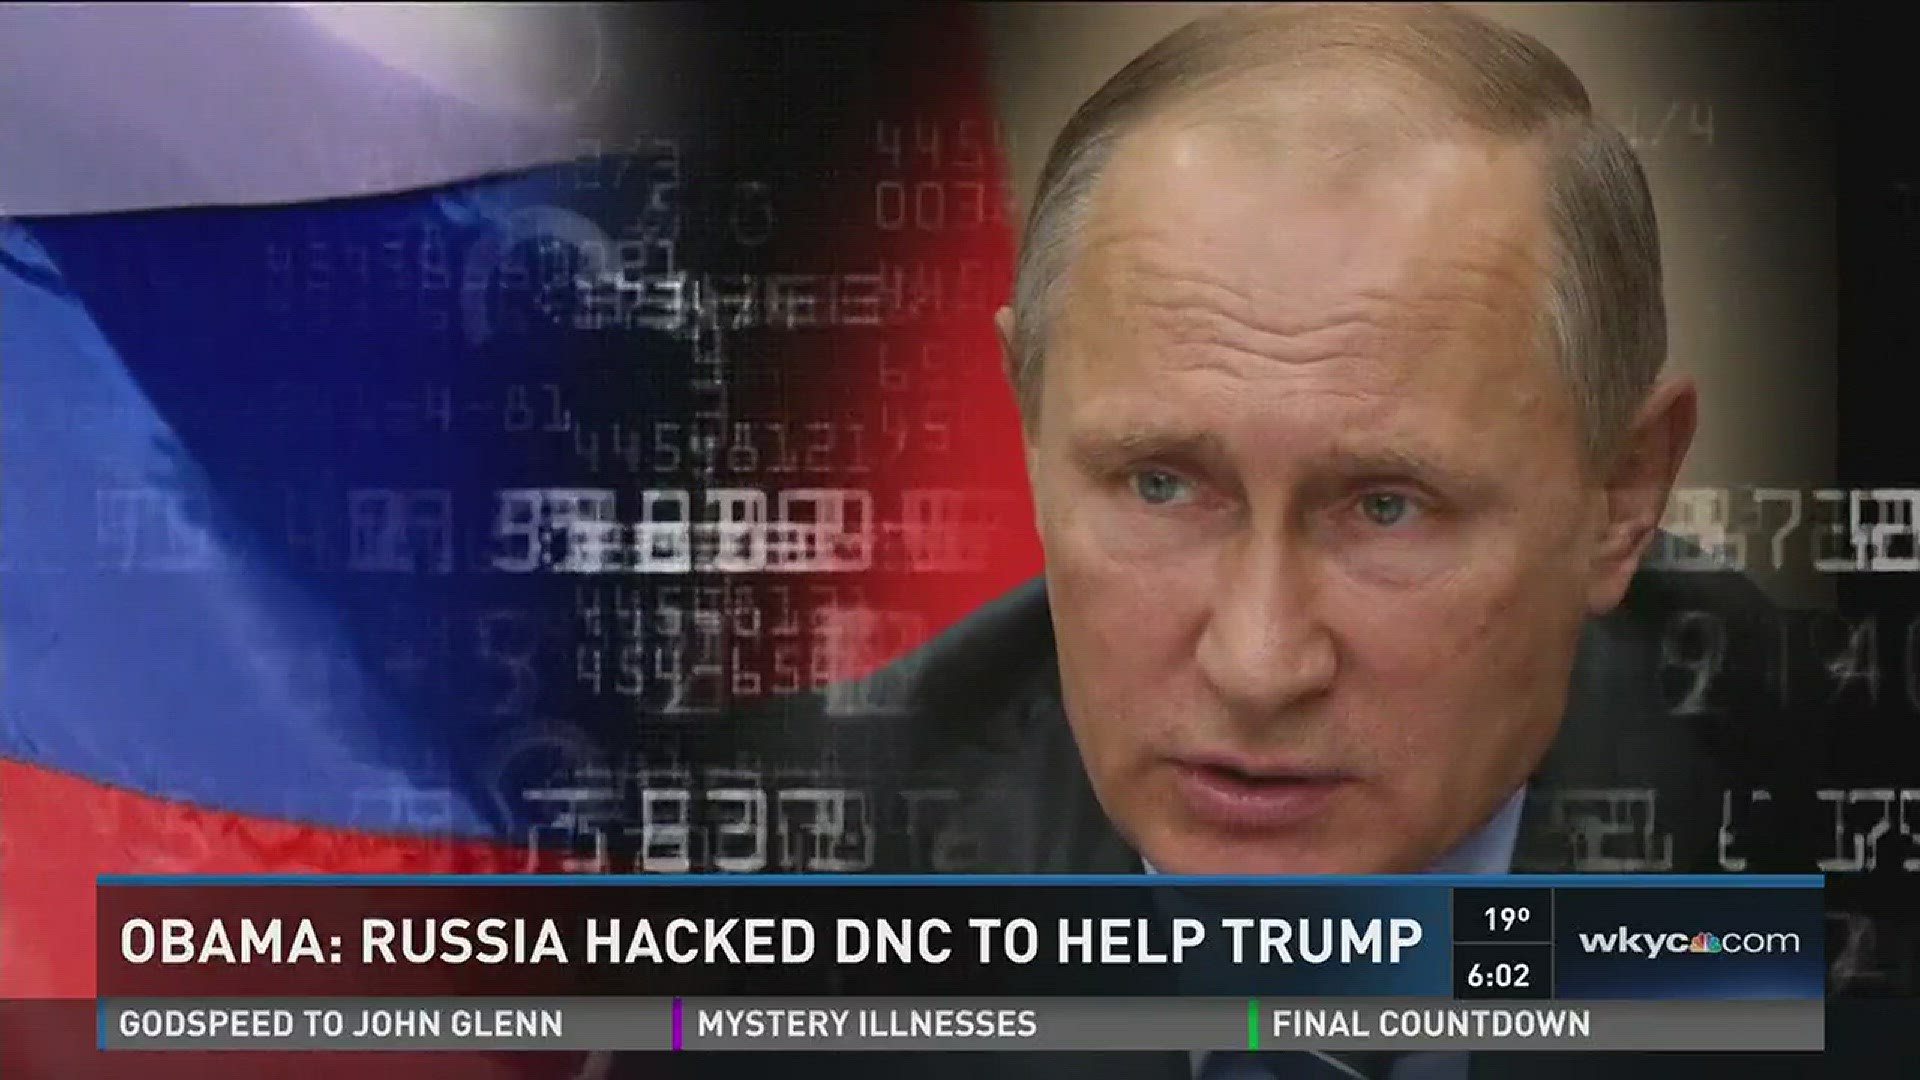 Obama: Russia hacked DNC to help Trump